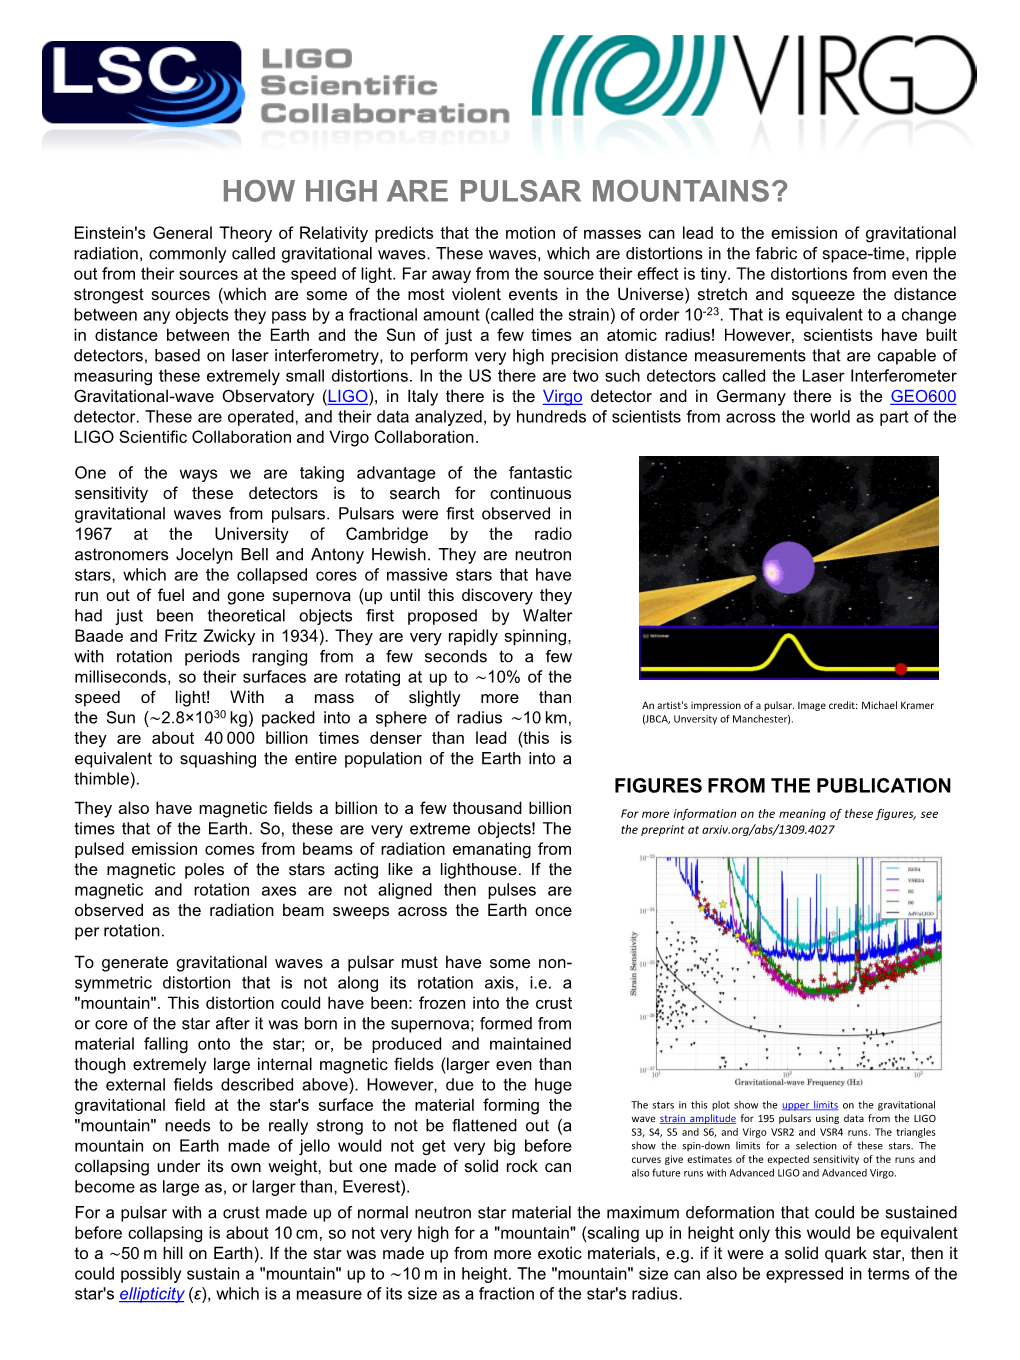 How High Are Pulsar Mountains?